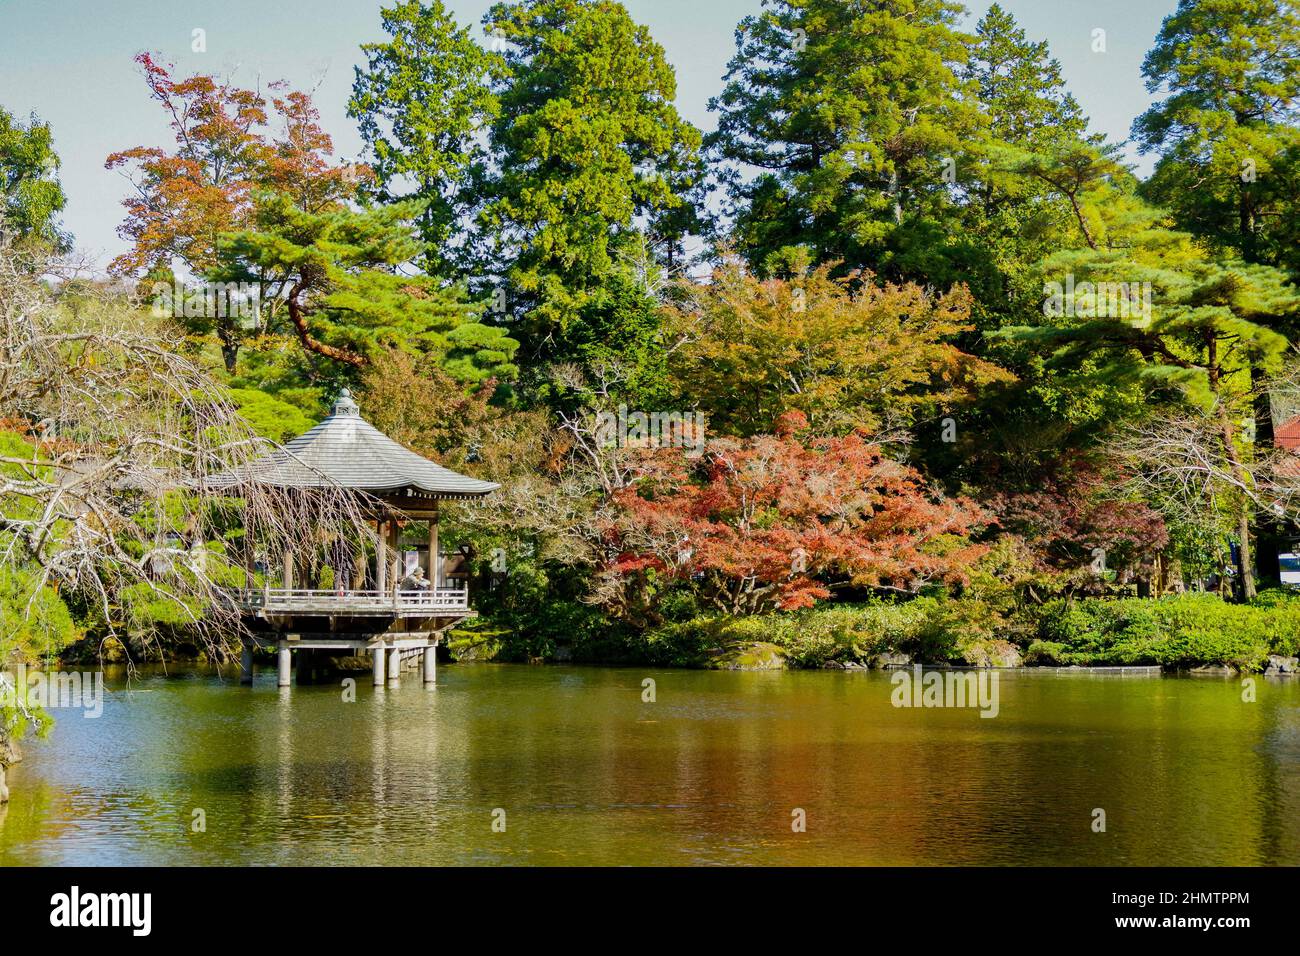 An oriental pavilion stands in the middle of a calm and peaceful pond. The  leaves turning red will let you know the autumn is coming. Stock Photo